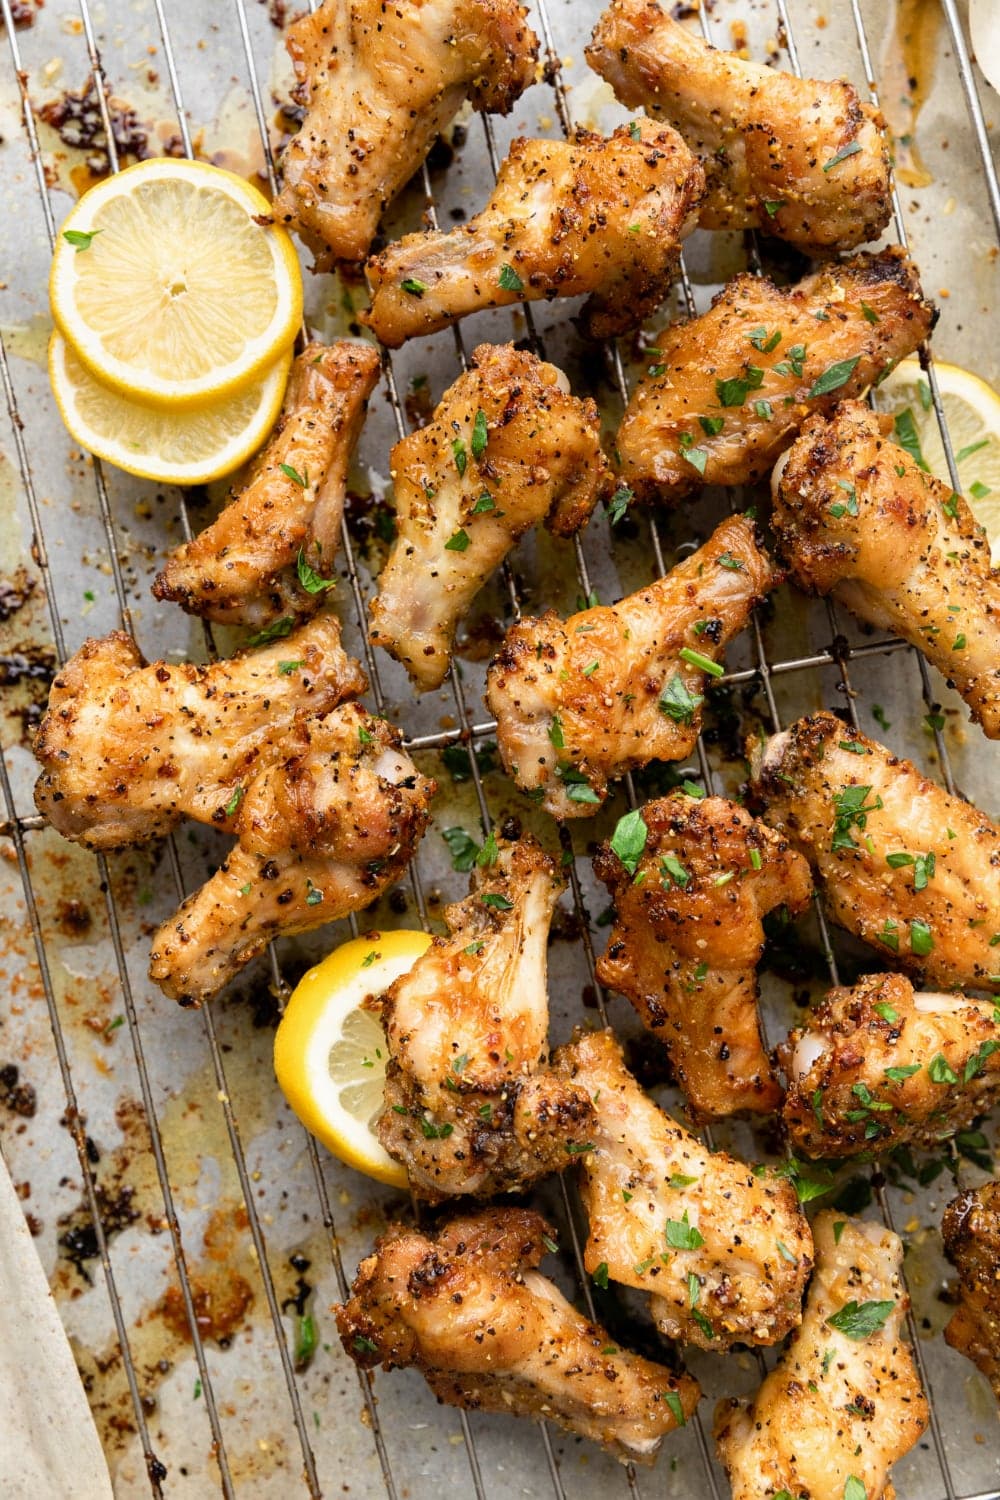 Baked lemon pepper chicken wings on a wire rack with lemon and parsley.